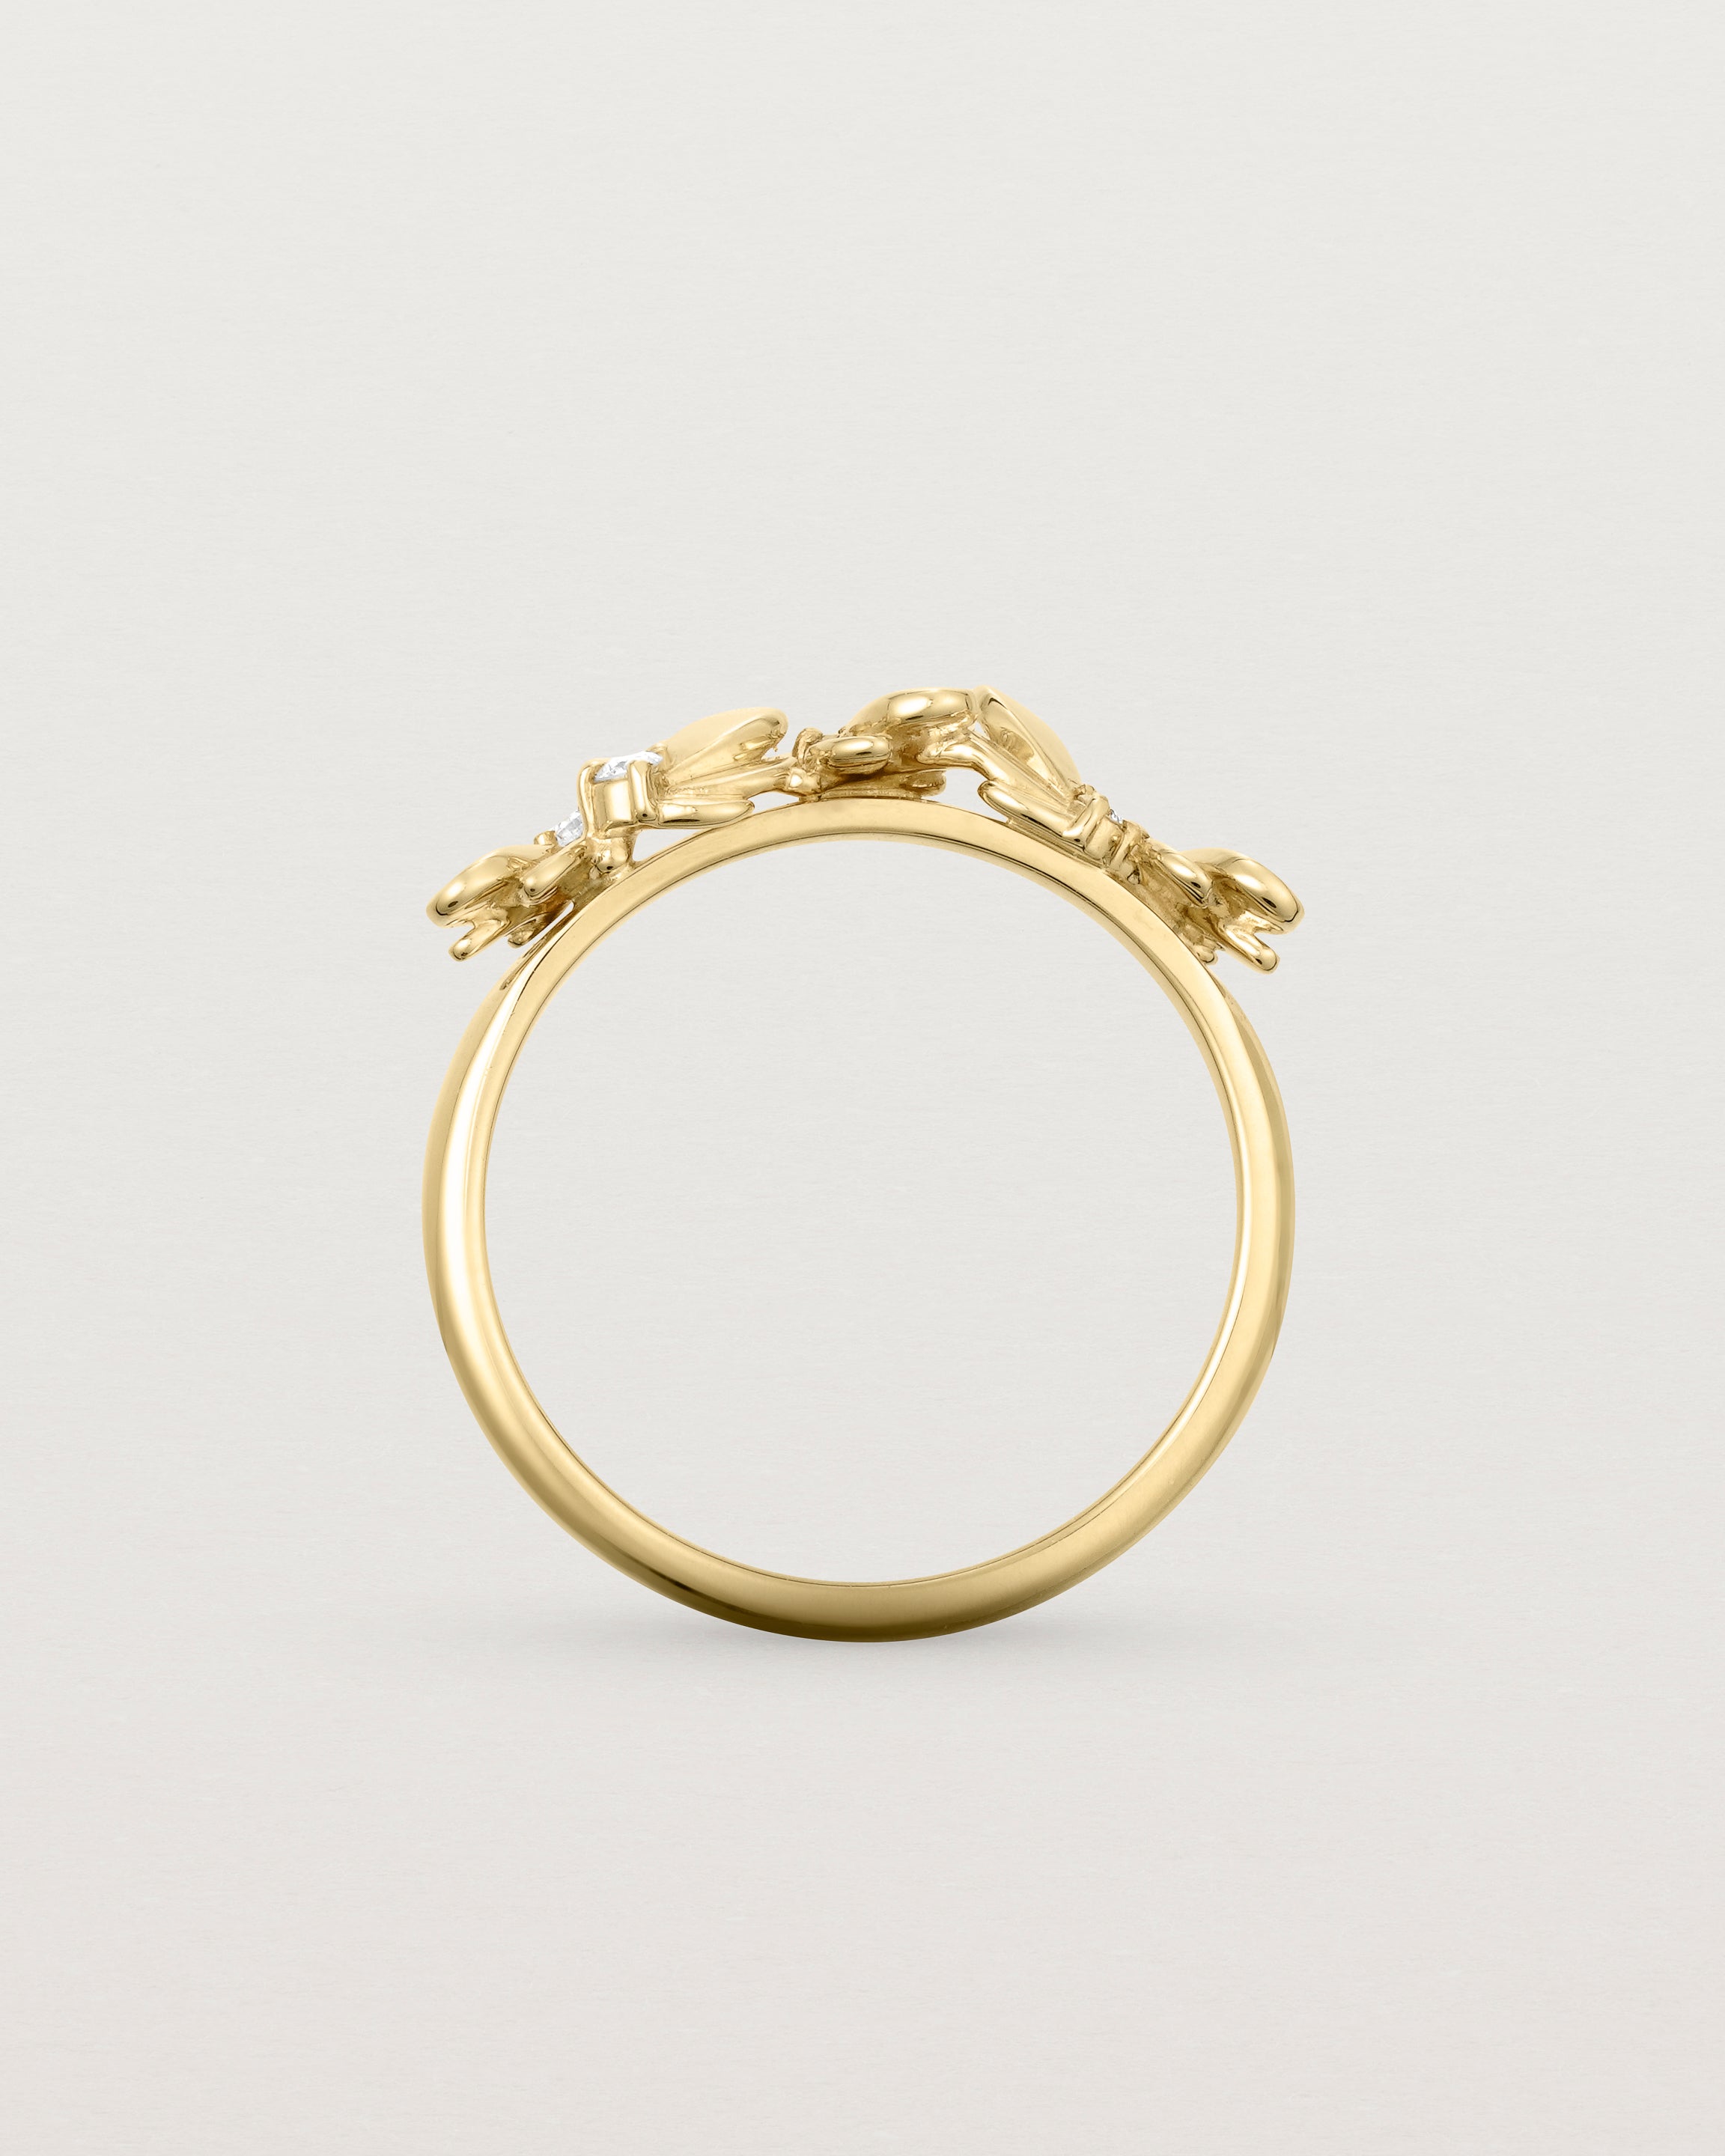 Standing view of the Aeris Wrap Ring | Diamonds in Yellow Gold.